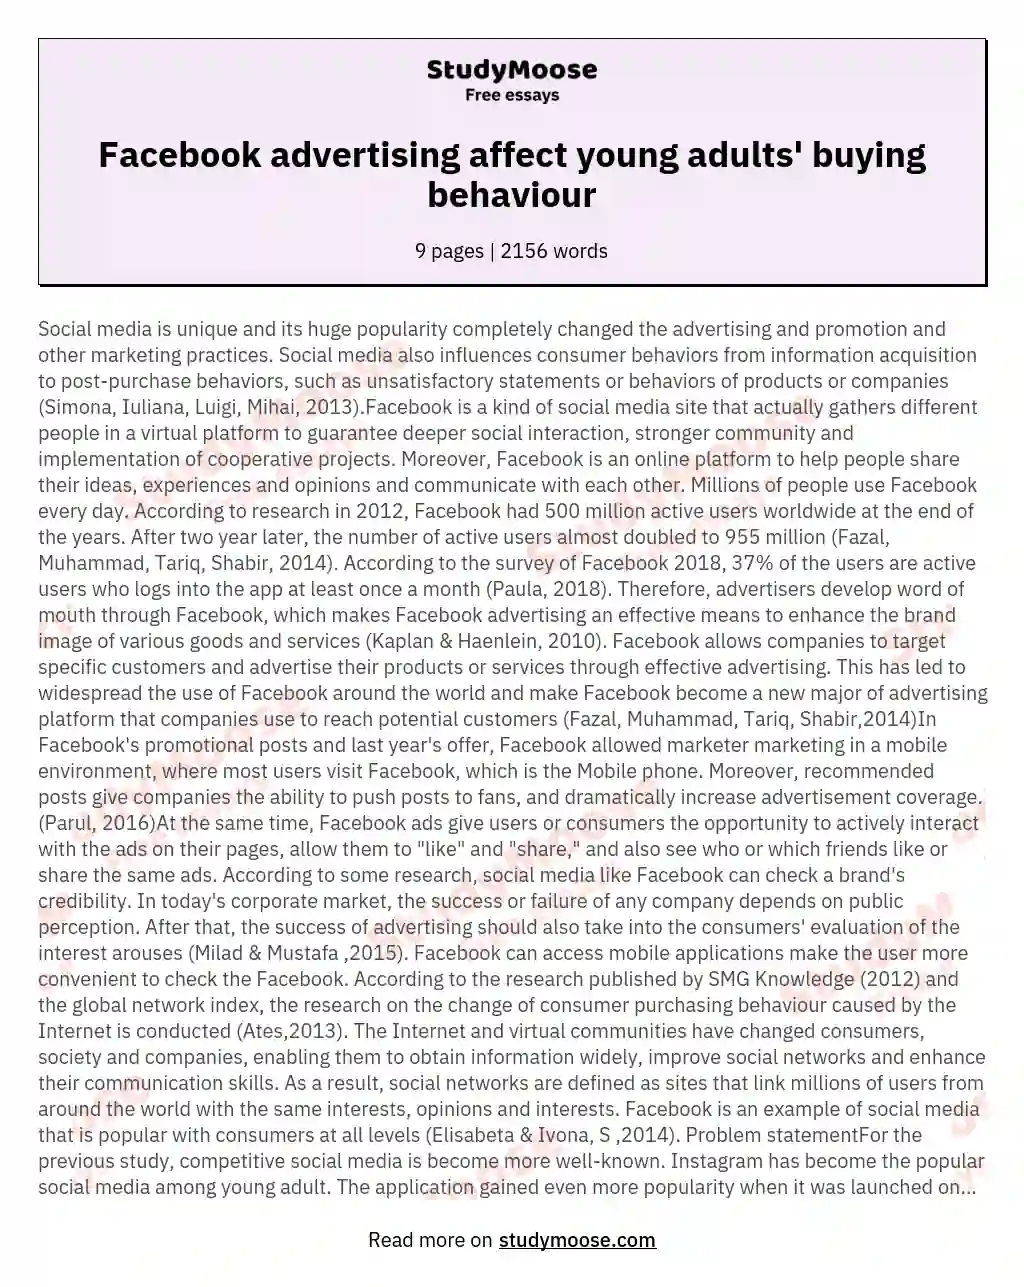 Facebook advertising affect young adults' buying behaviour